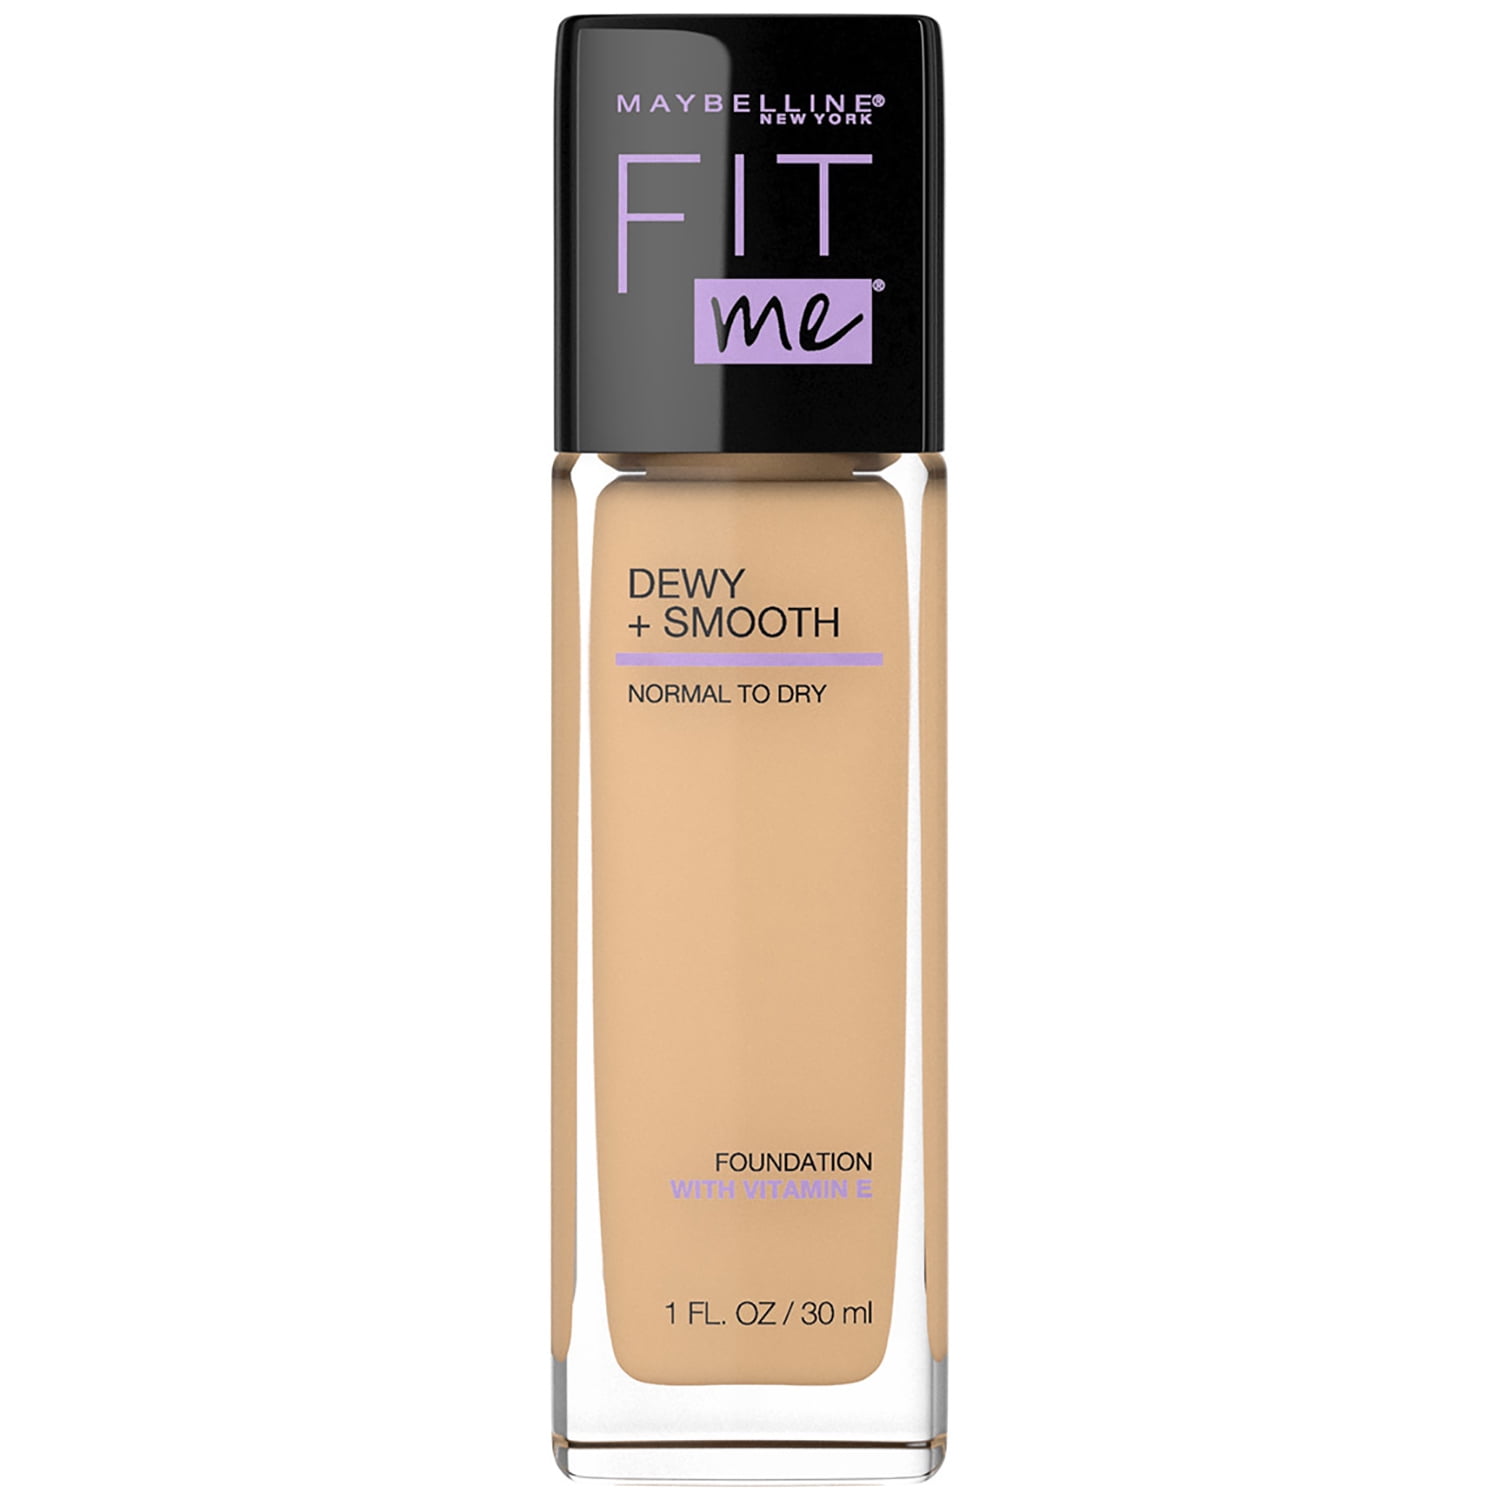 Maybelline Fit Me Dewy + Smooth Liquid Foundation Makeup with SPF 18, Sandy Beige, 1 fl oz